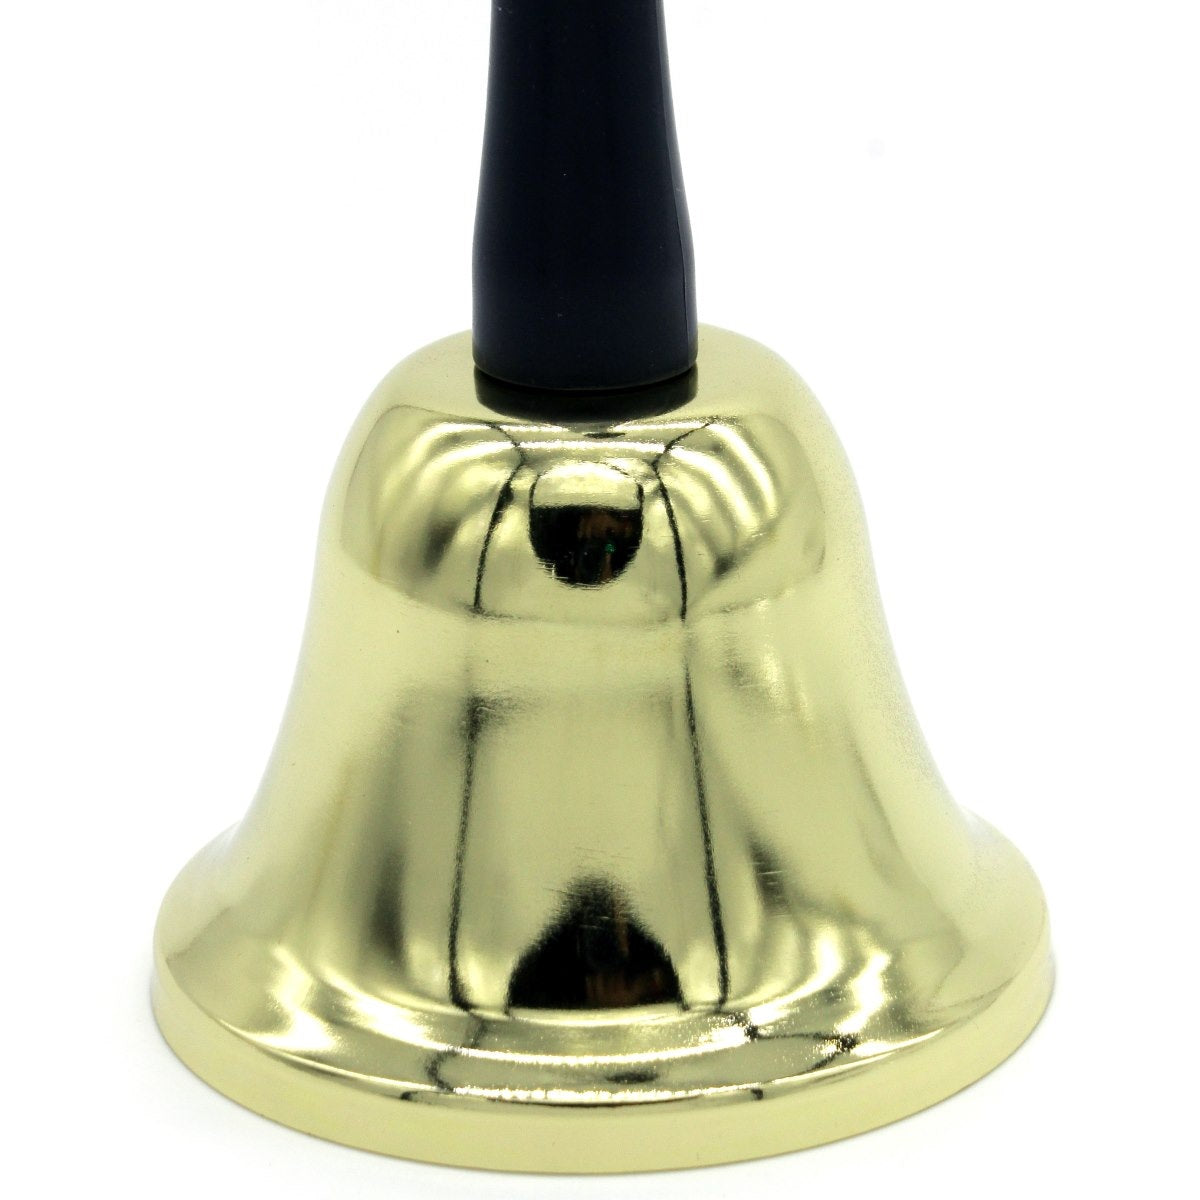 Multipurpose Golden Office Call Bell - For Shops, Office Use, Corporate Gifting